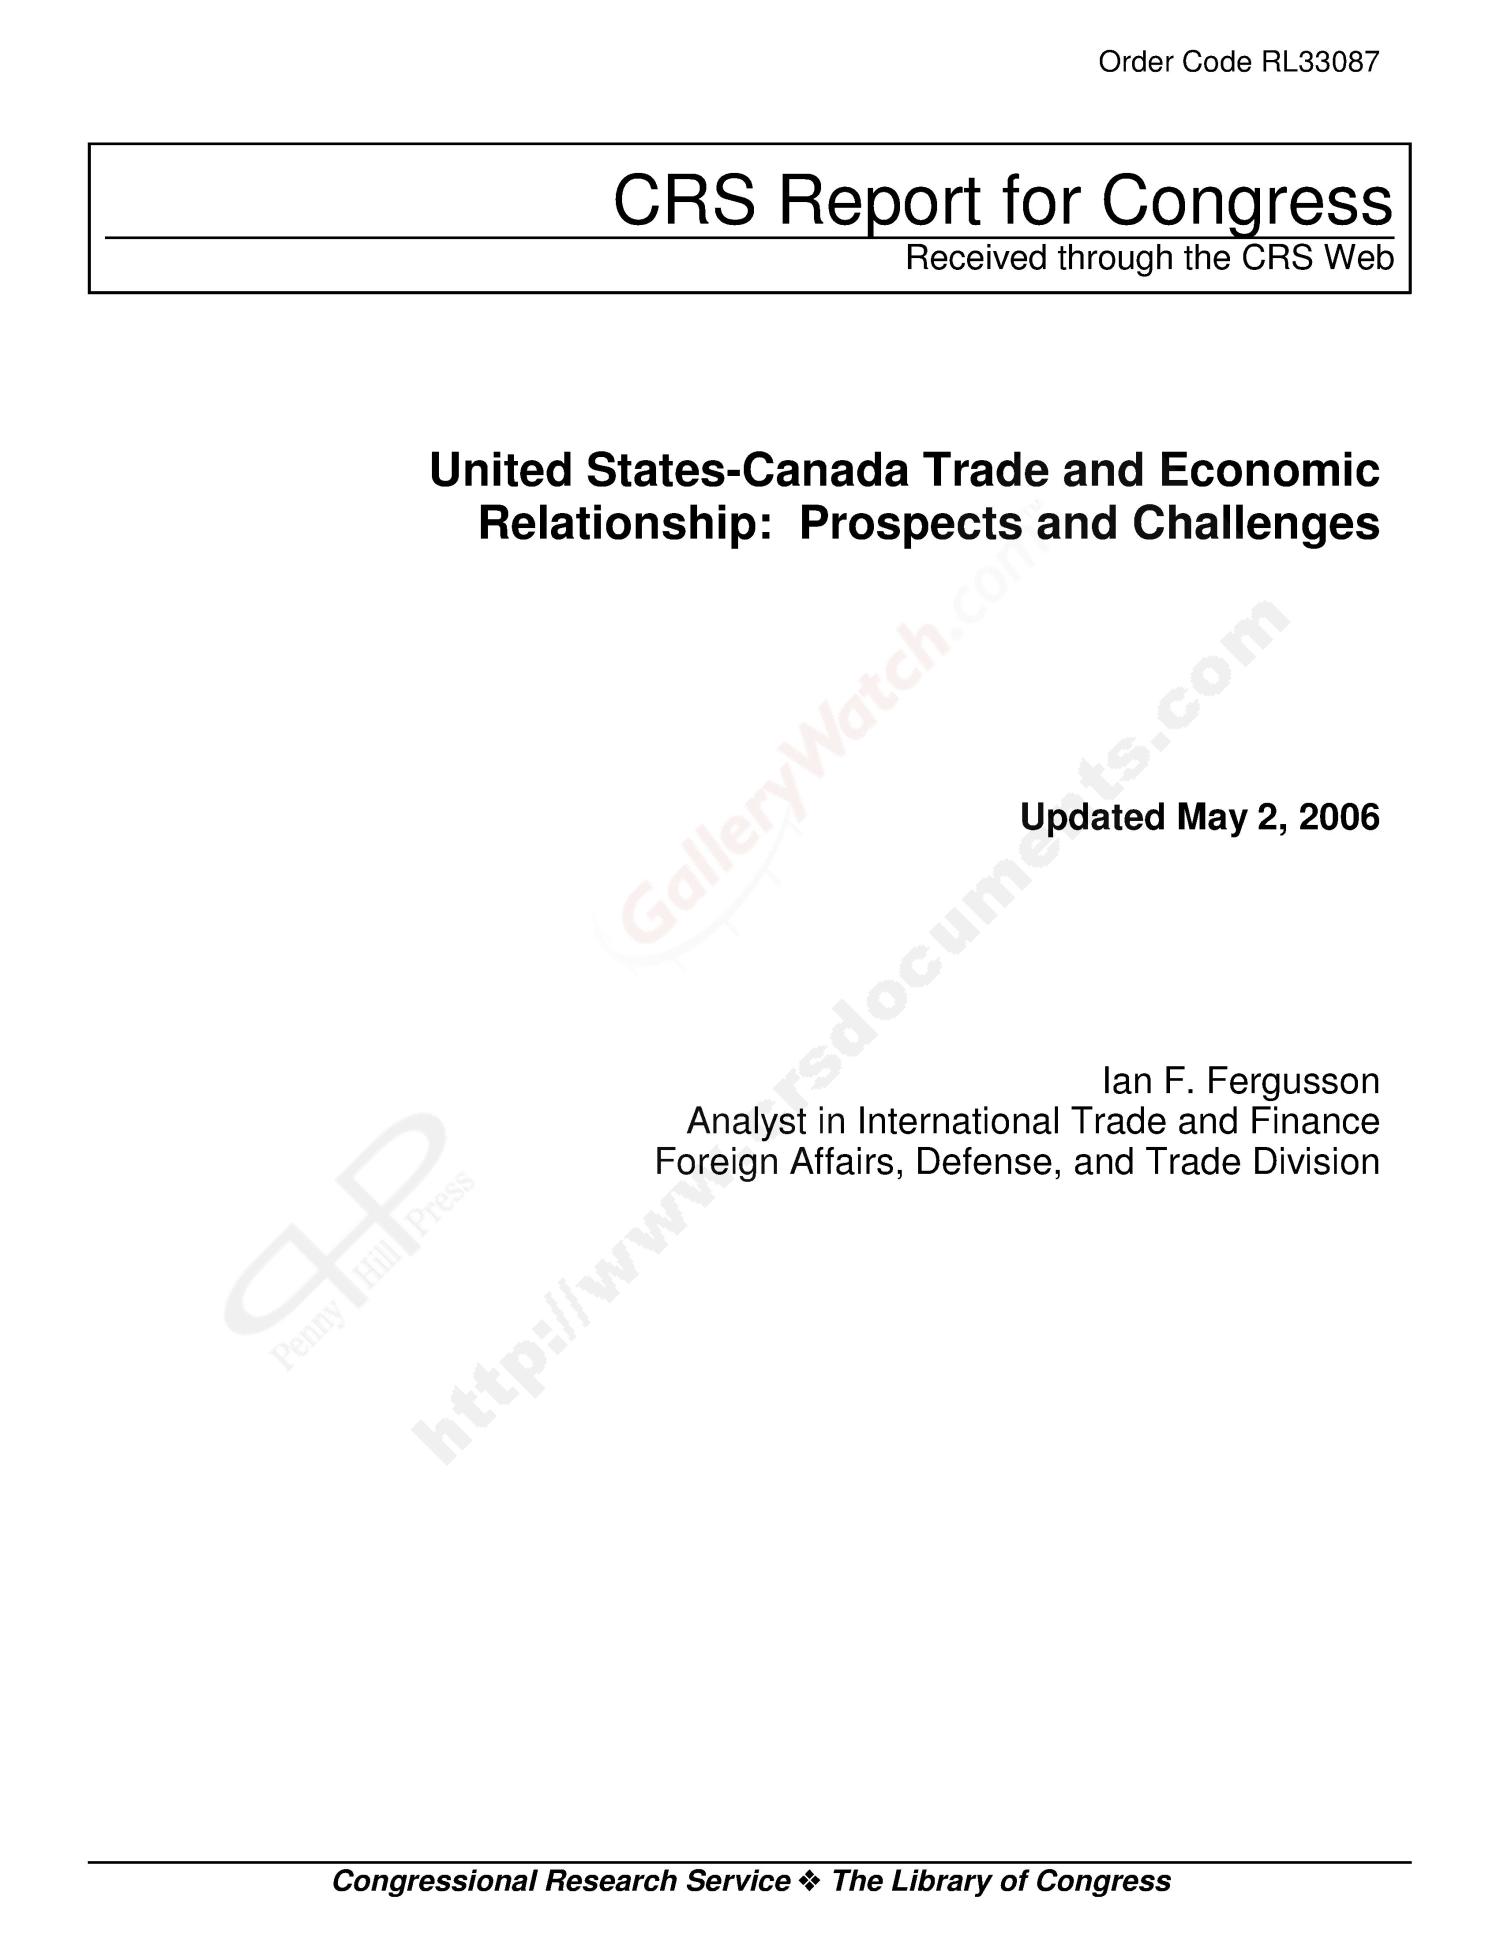 United States-Canada Trade and Economic Relationship: Prospects and Challenges
                                                
                                                    [Sequence #]: 1 of 28
                                                